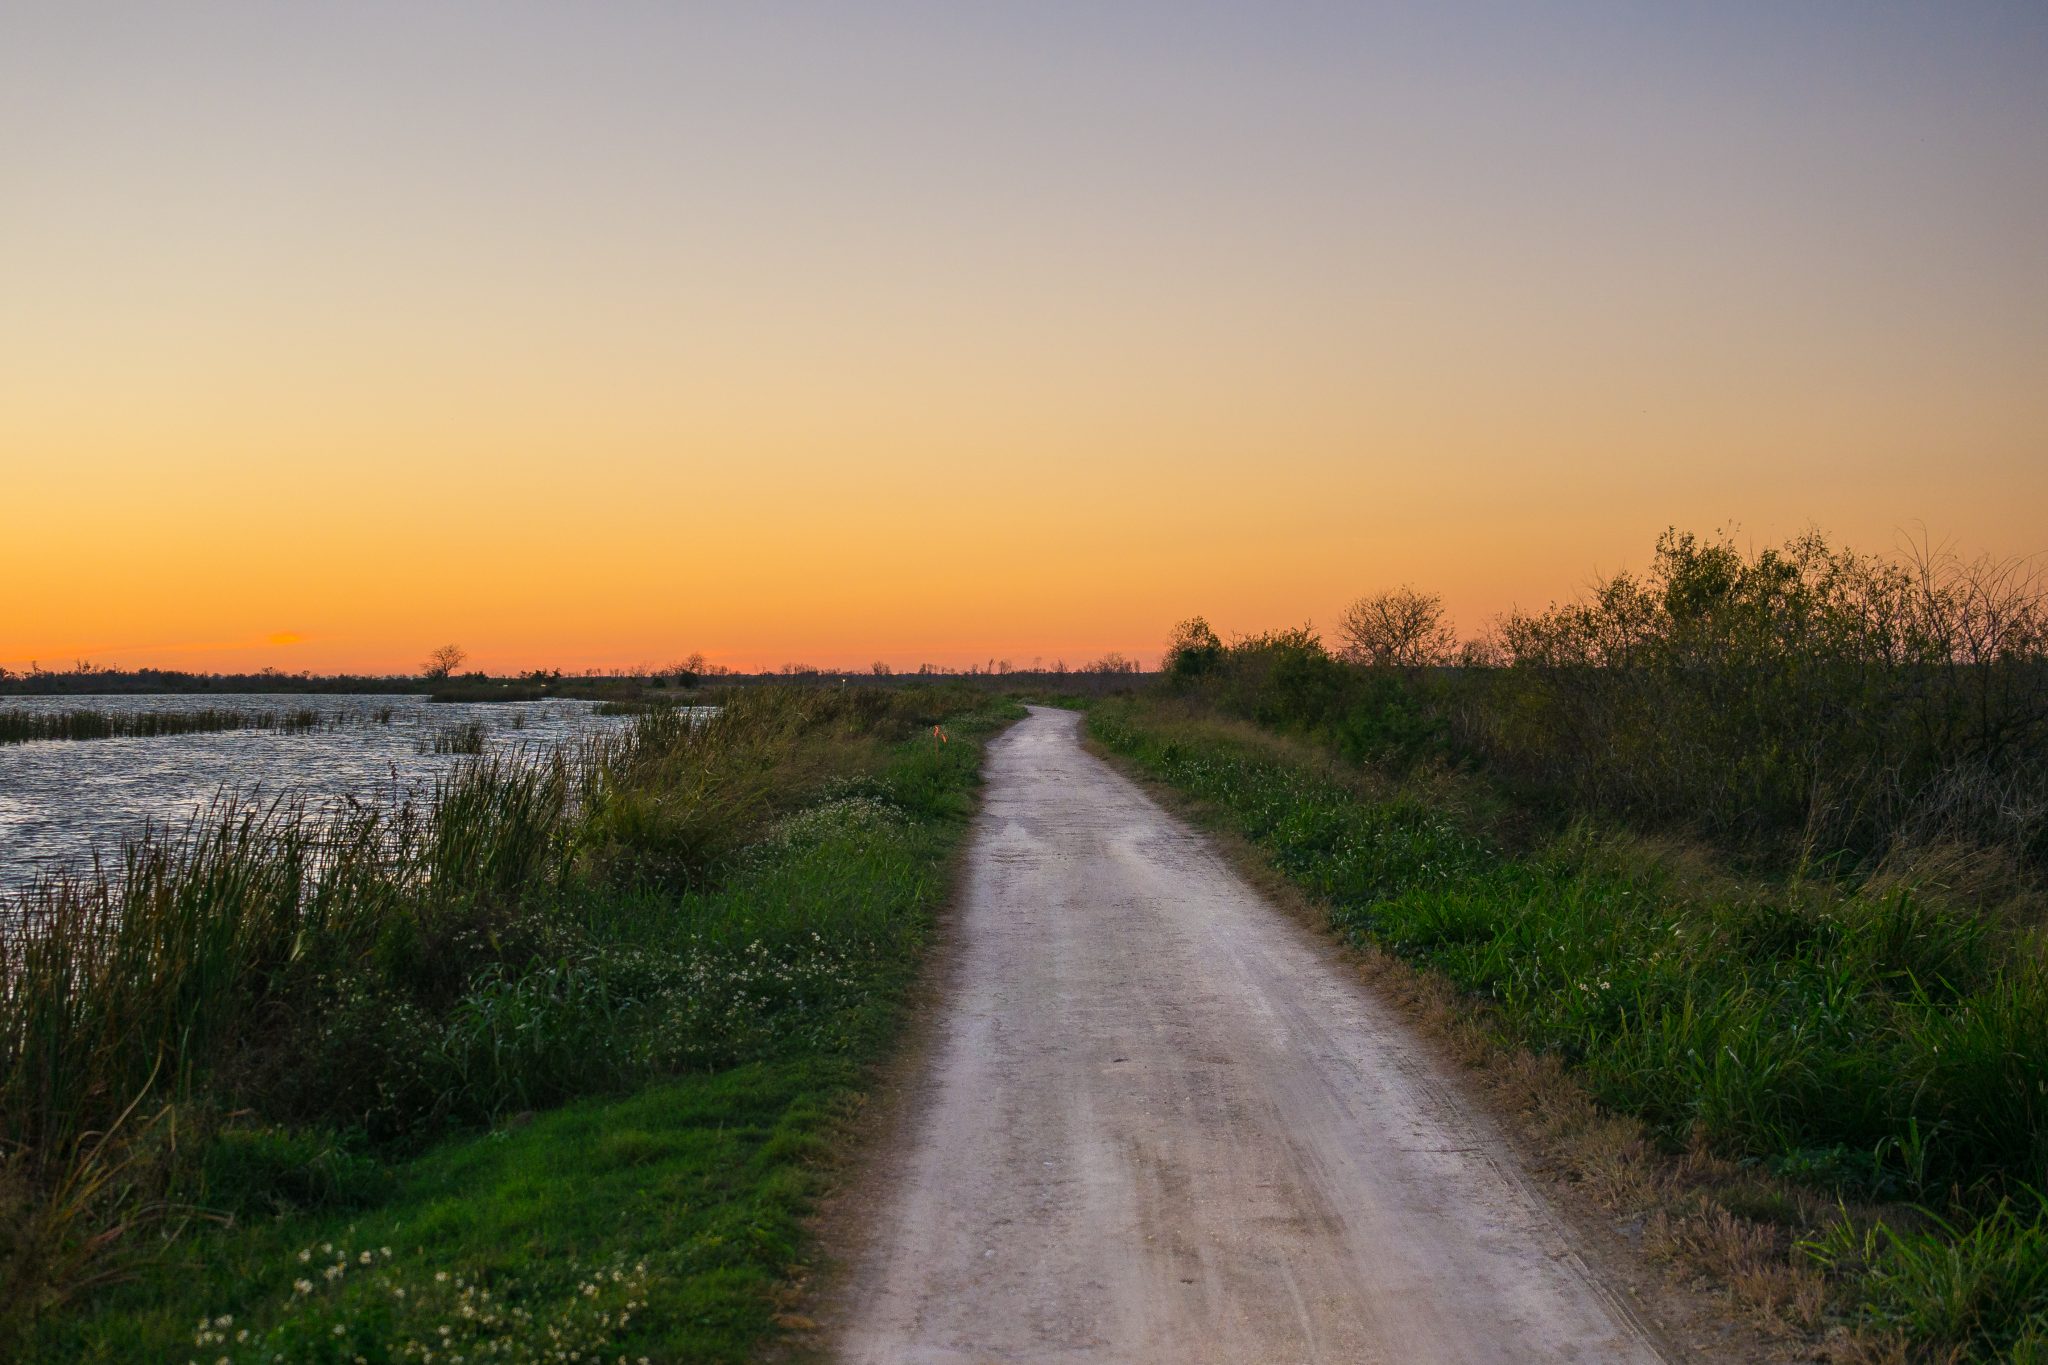 Sunset over lake along a dirt road in Florida